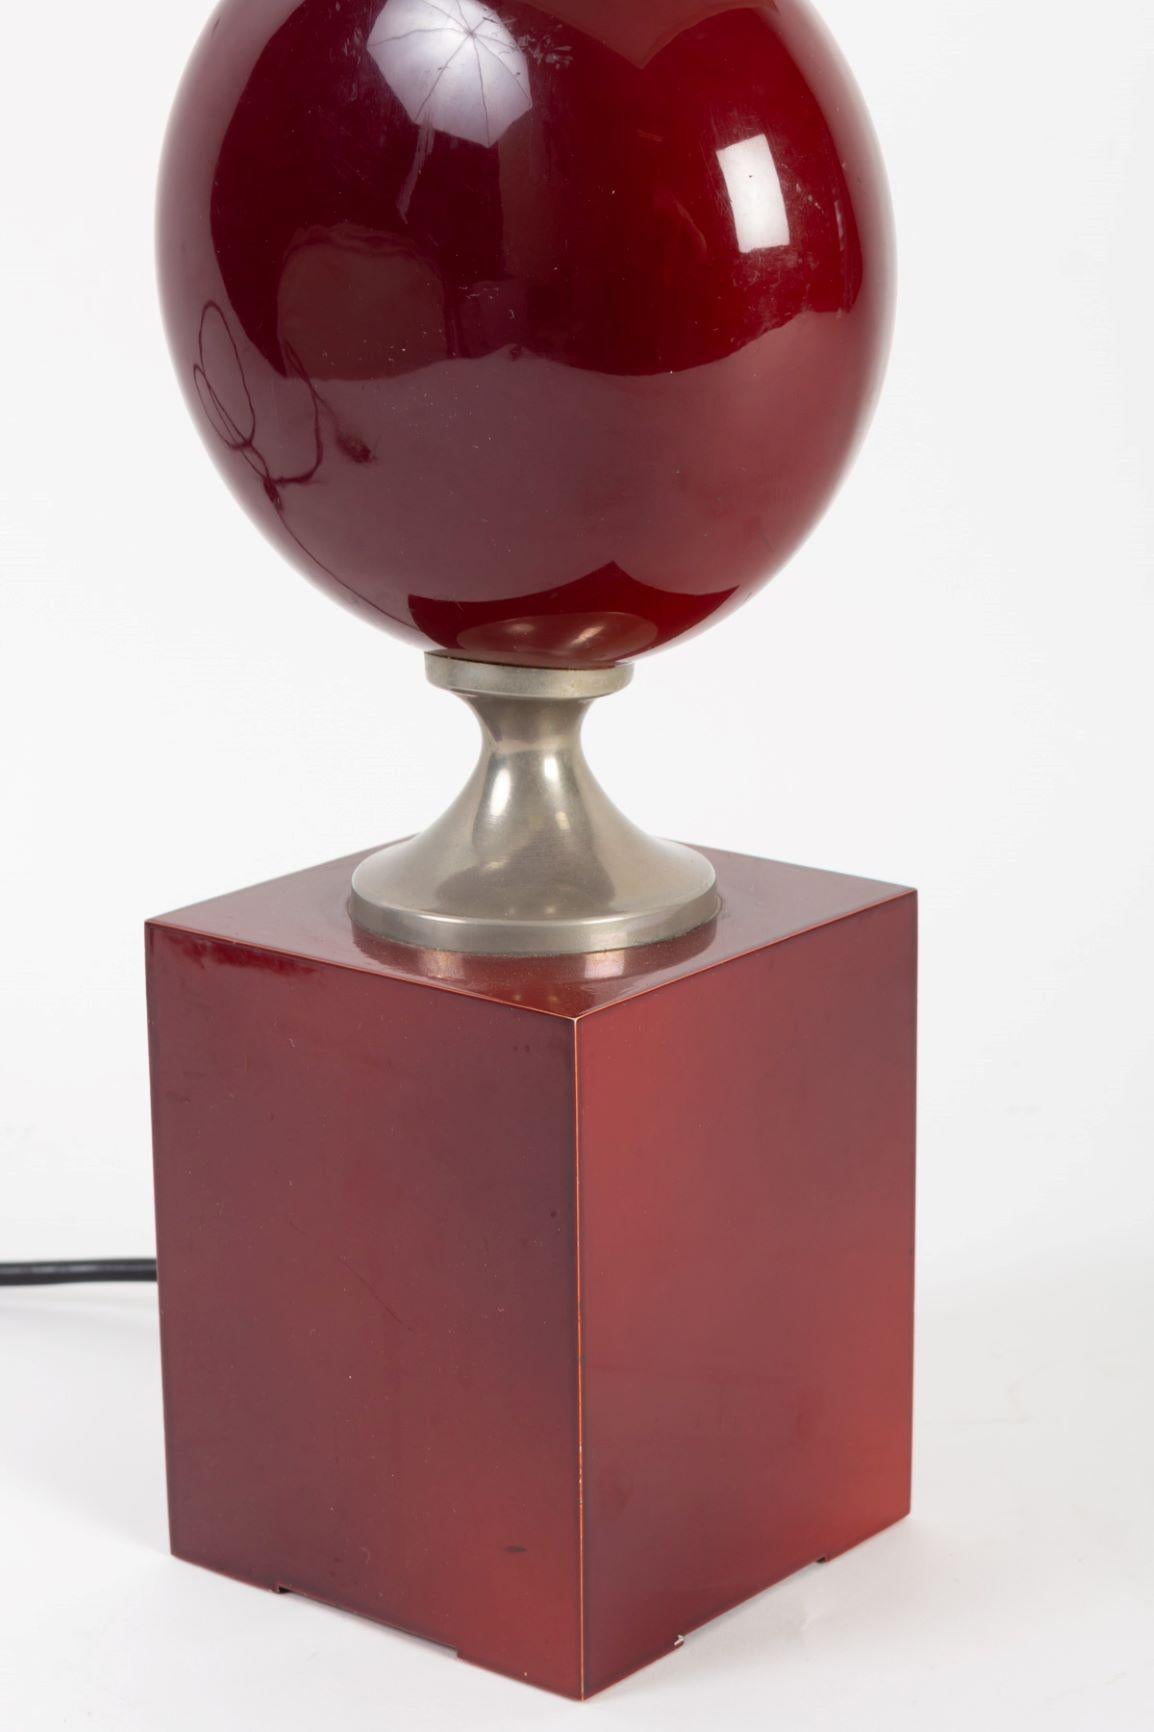 Beautiful blood red lacquered metal table lamp by Philippe Barbier, with square section from the 1970s in blood red lacquered metal.
Dimensions: height: 40 cm, width: 10 cm.
Total height: 57 cm.
Lampshade added later: dimensions: 20 x 20 x 20